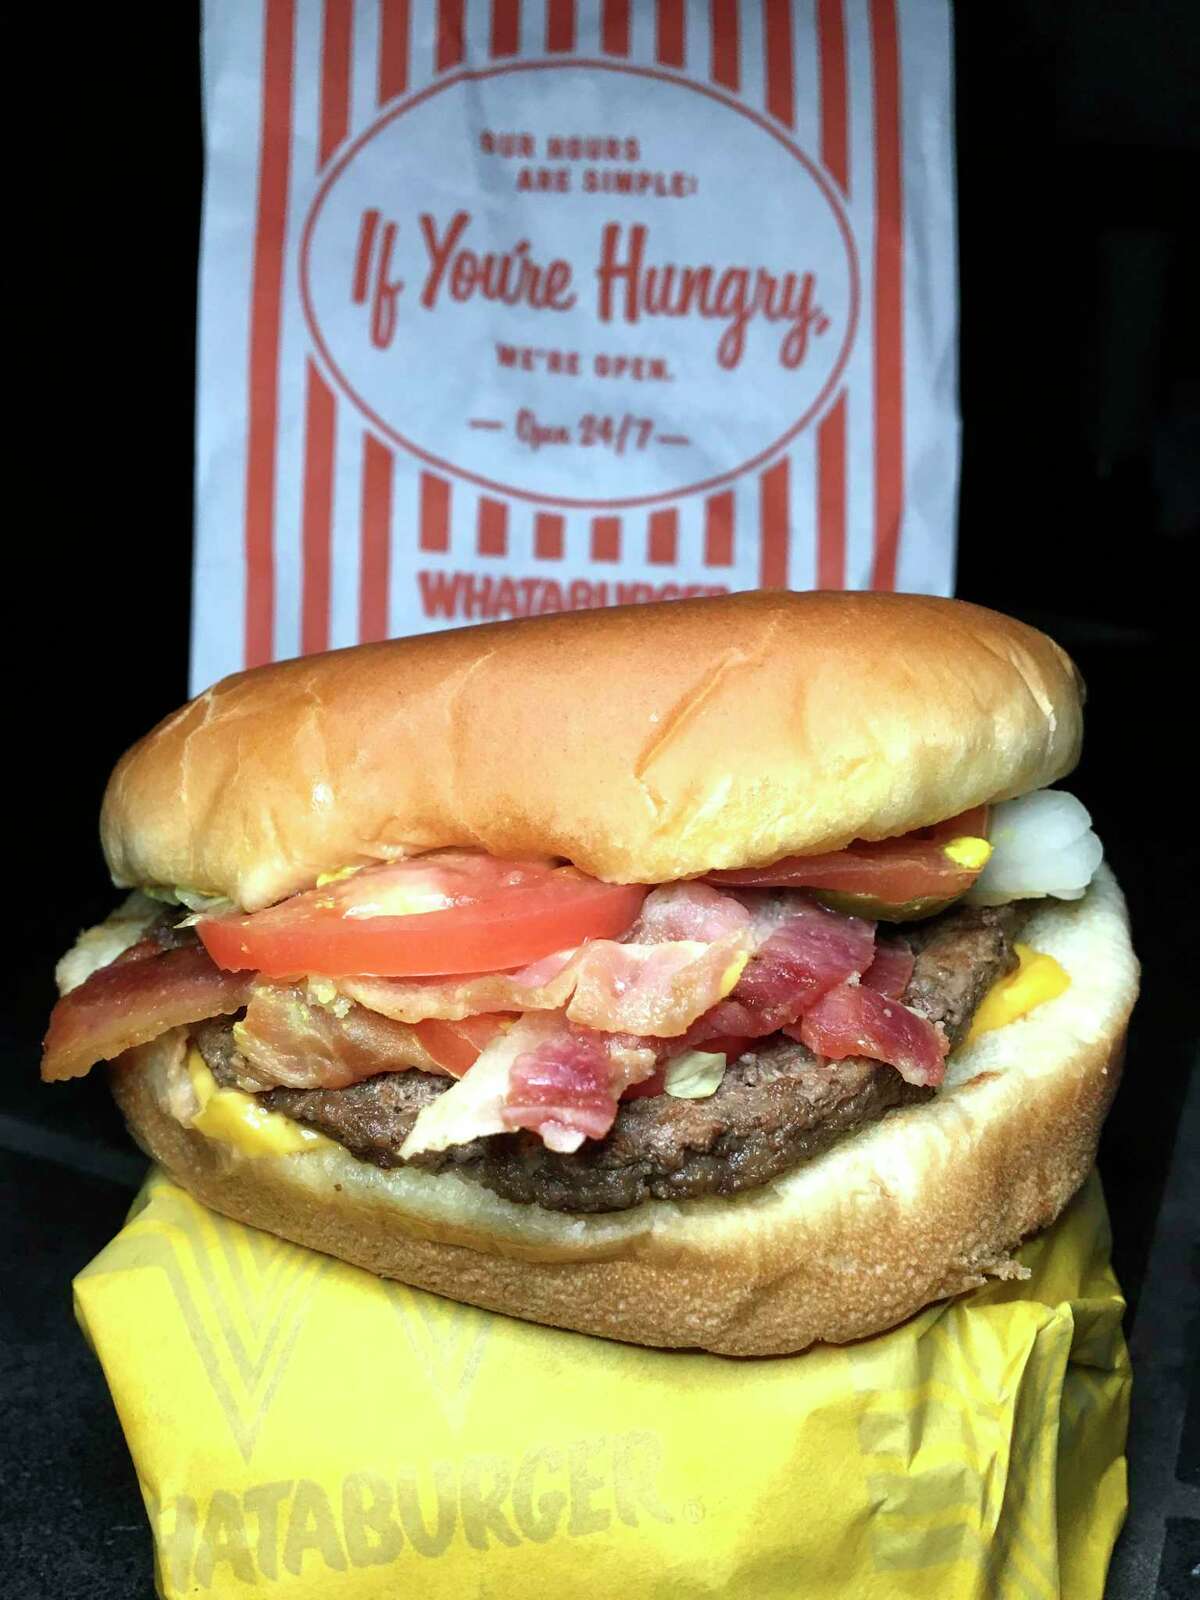 As of 3 p.m. Tuesday, March 17, Whataburger will only serve customers through its drive-through lanes.